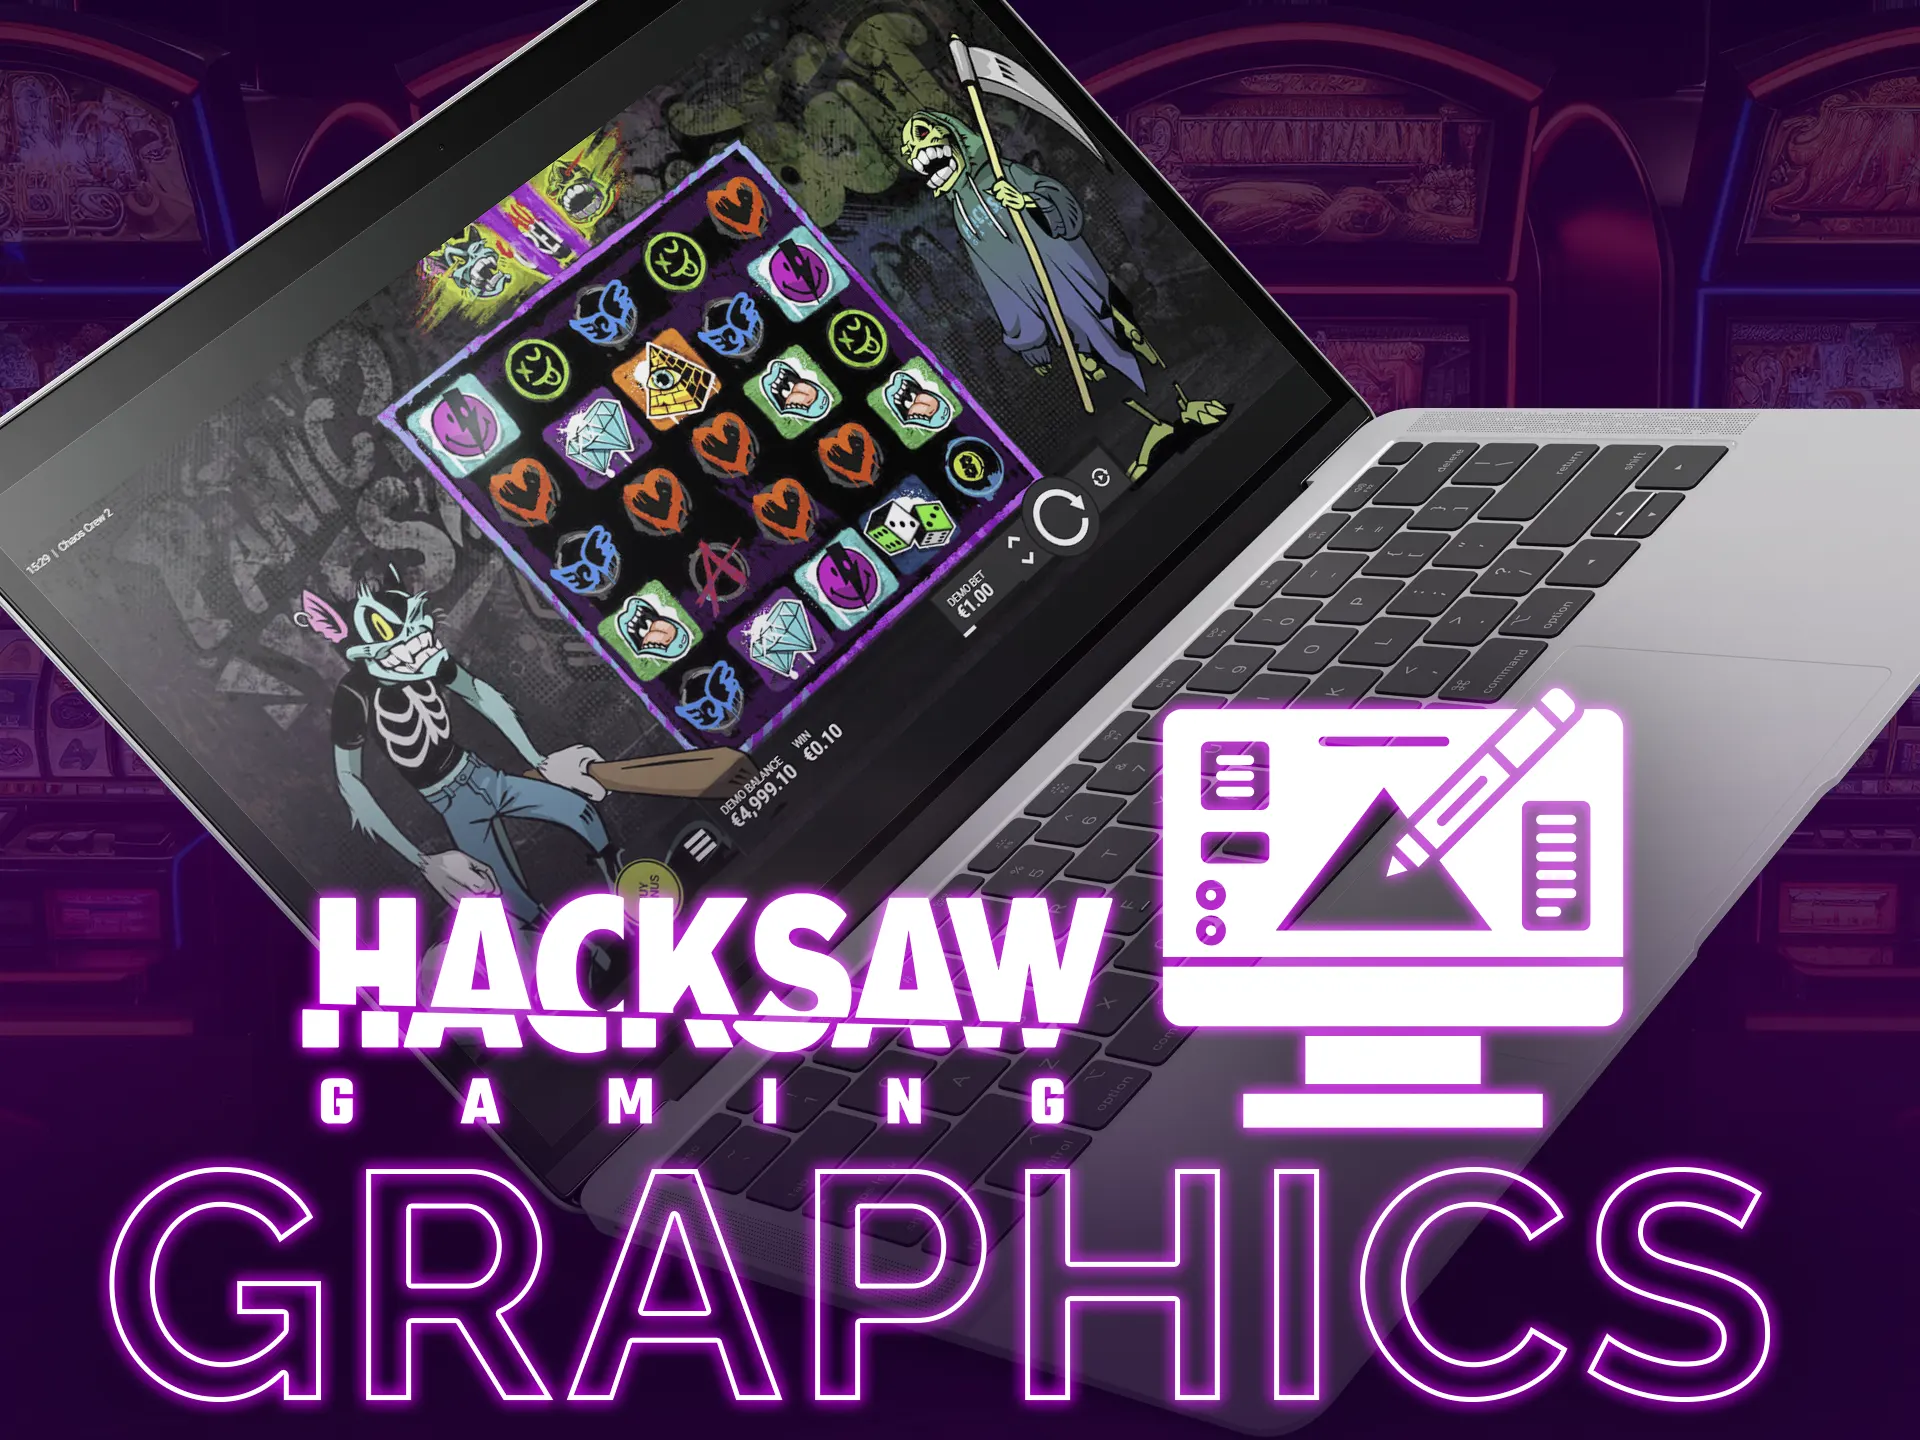 Hacksaw Gaming delivers top-notch graphics for enjoyable betting experiences.